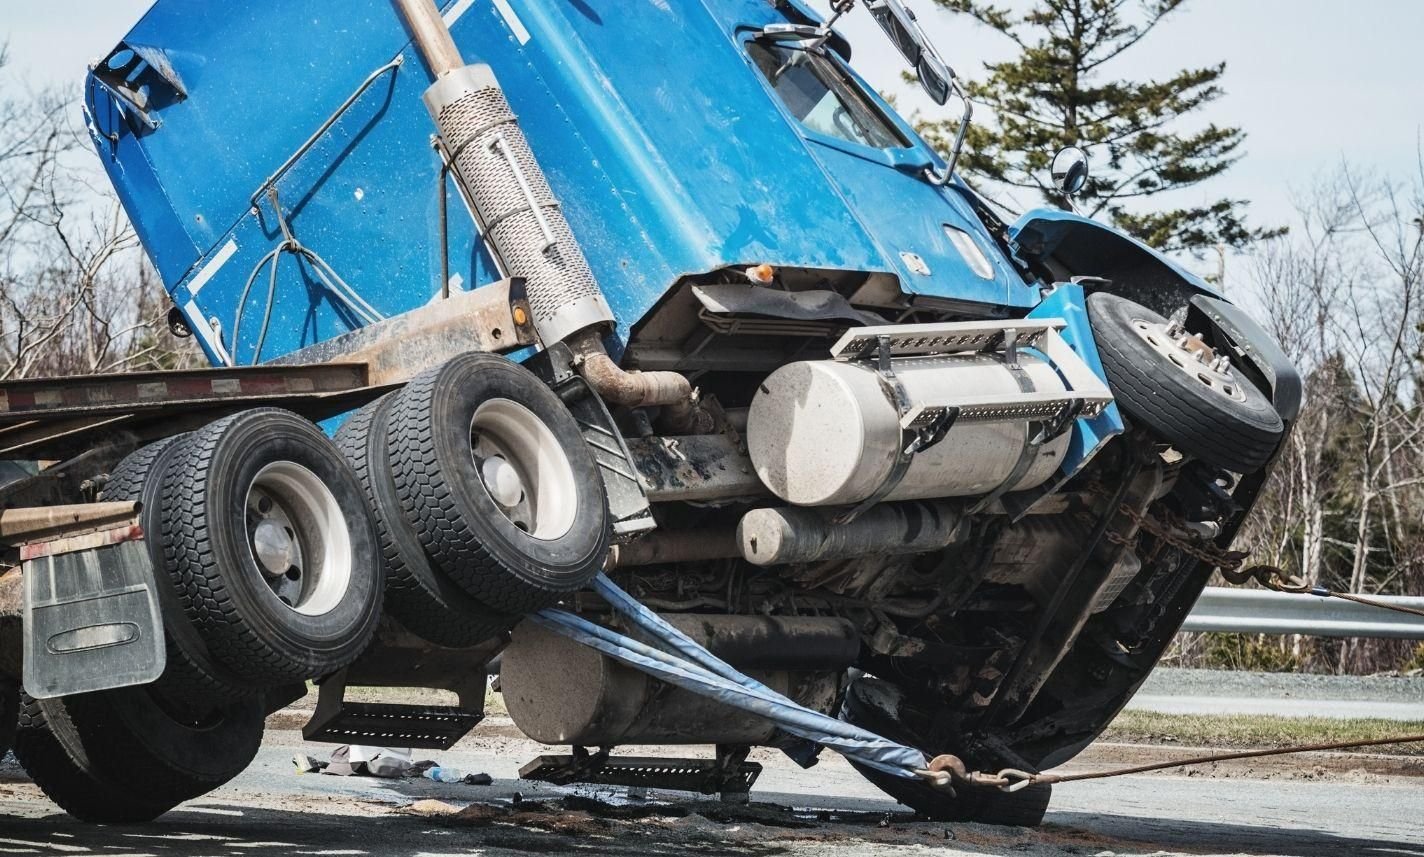 stonecrest-commercial-truck-accident-injury-lawyer